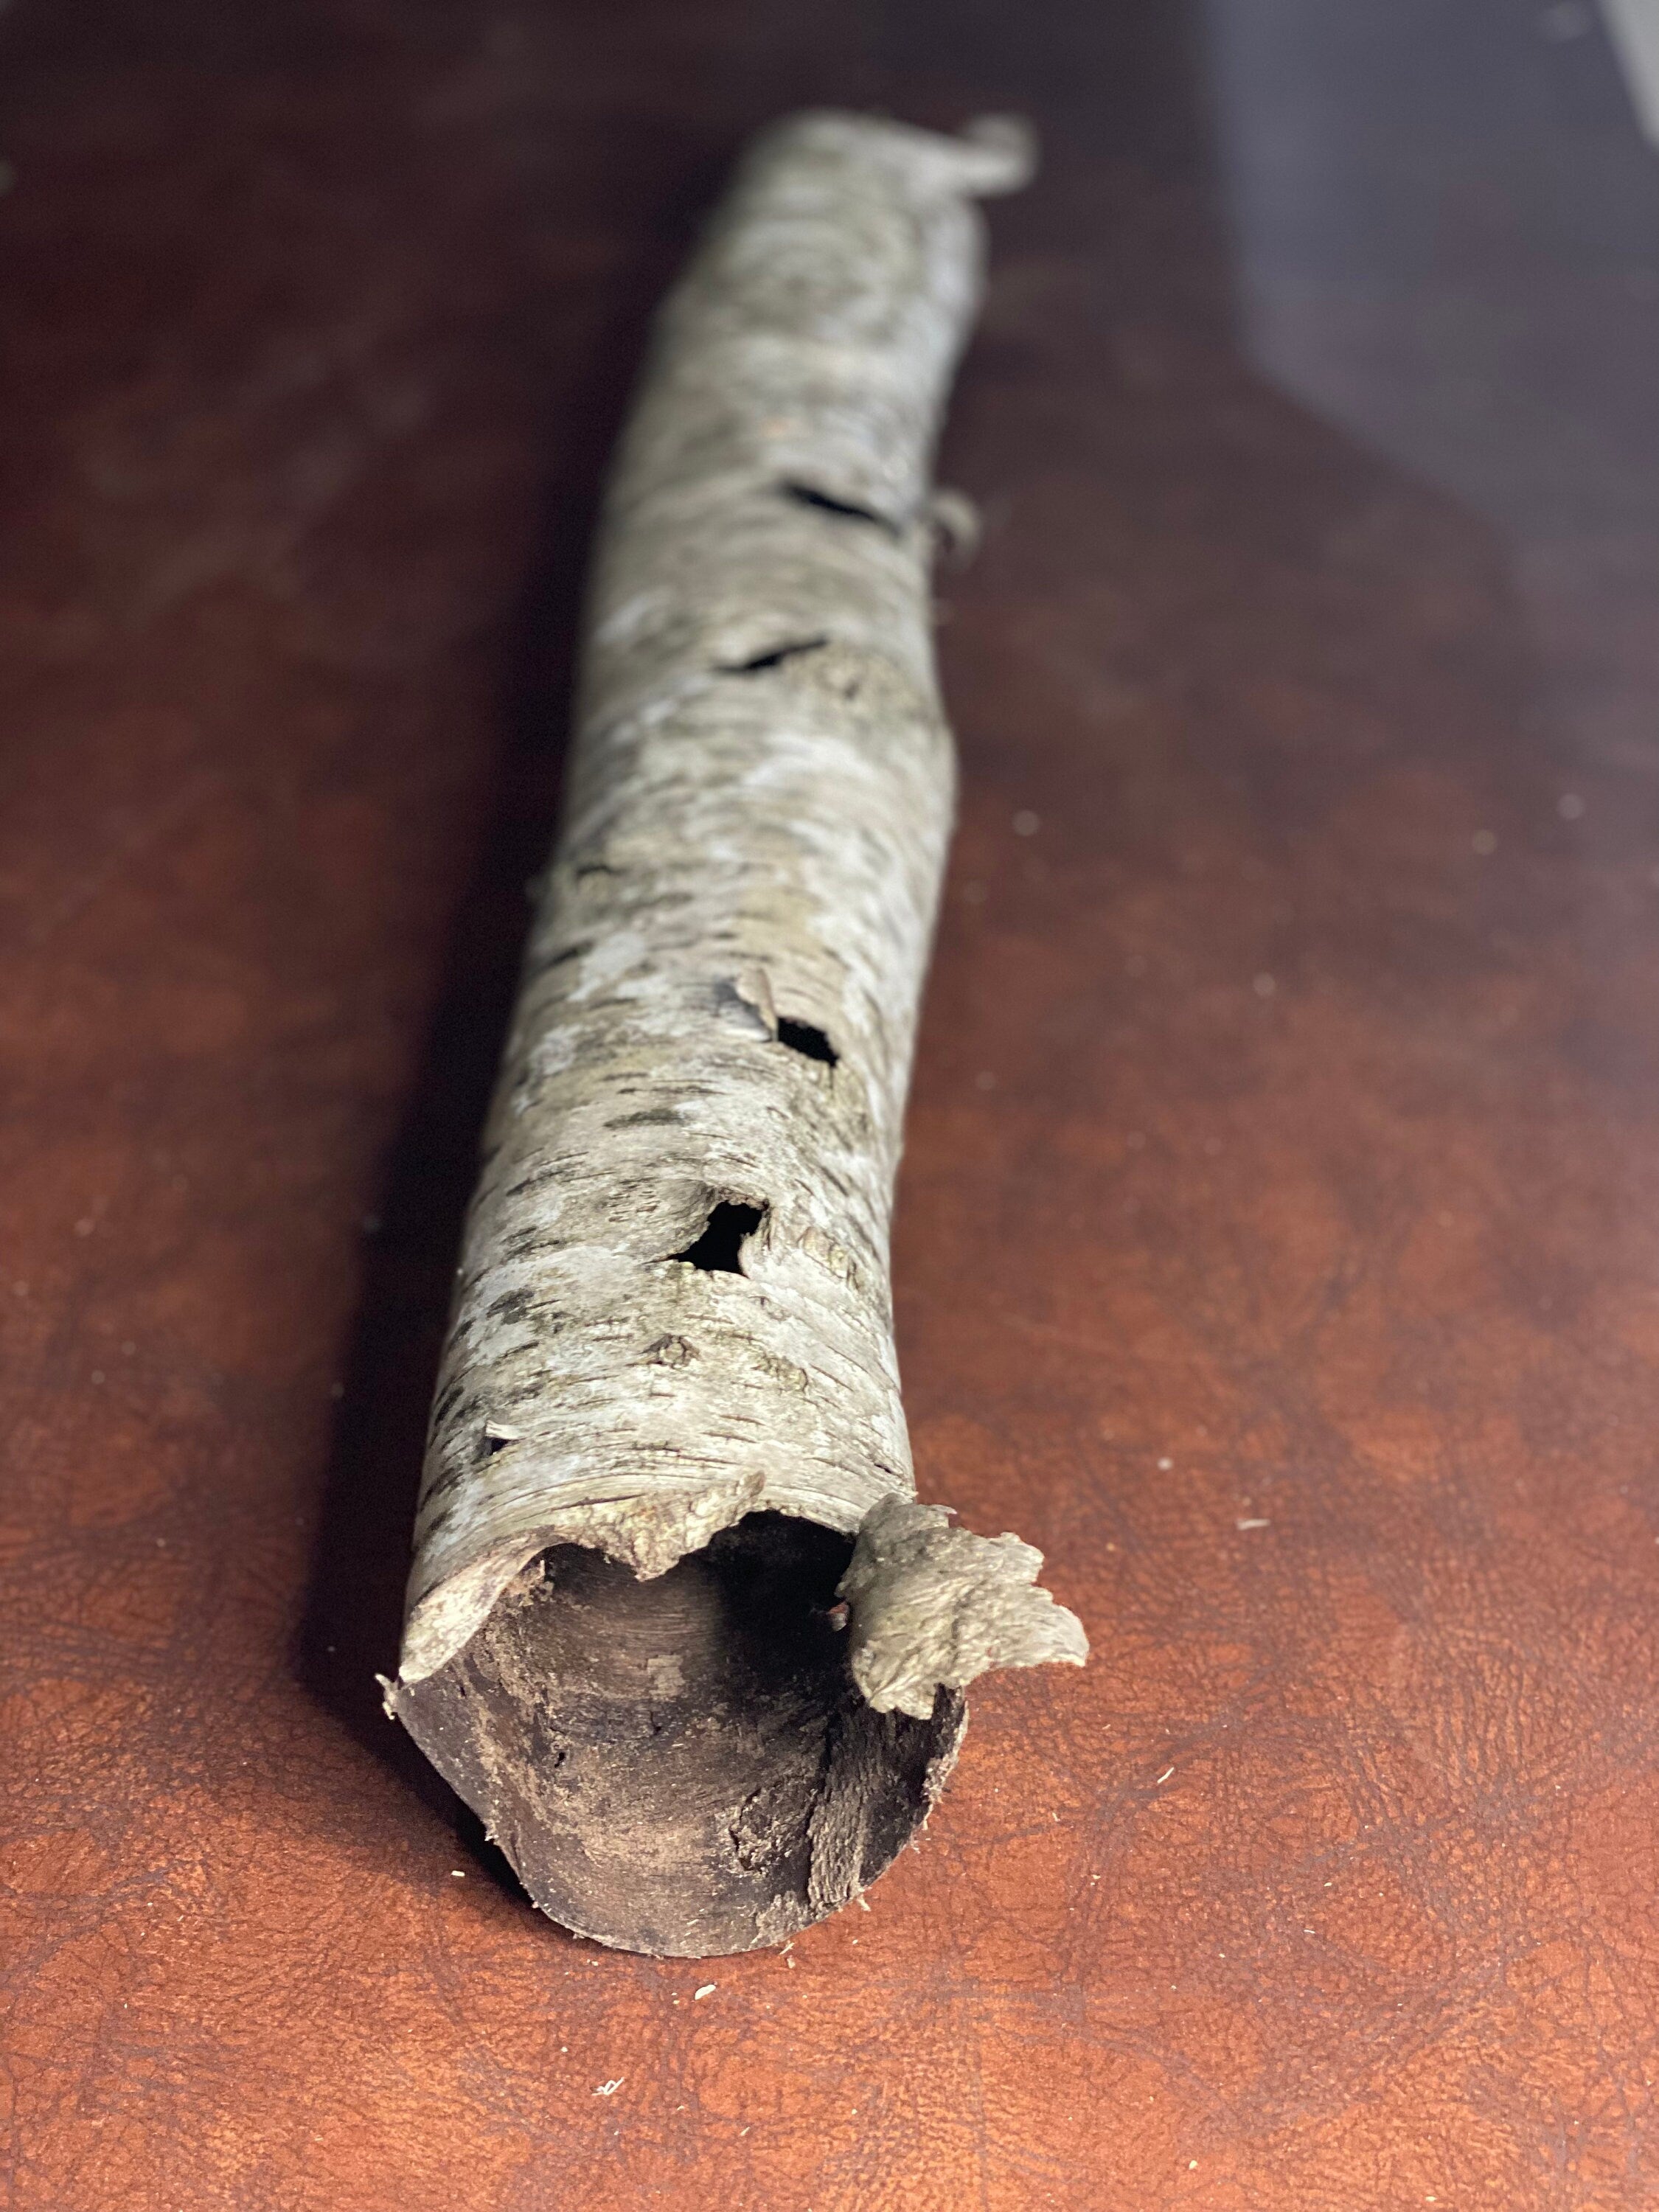 White Birch Bark Tube, Approximately 23 Inches Long by 4 Inches Wide and 3 Inches High